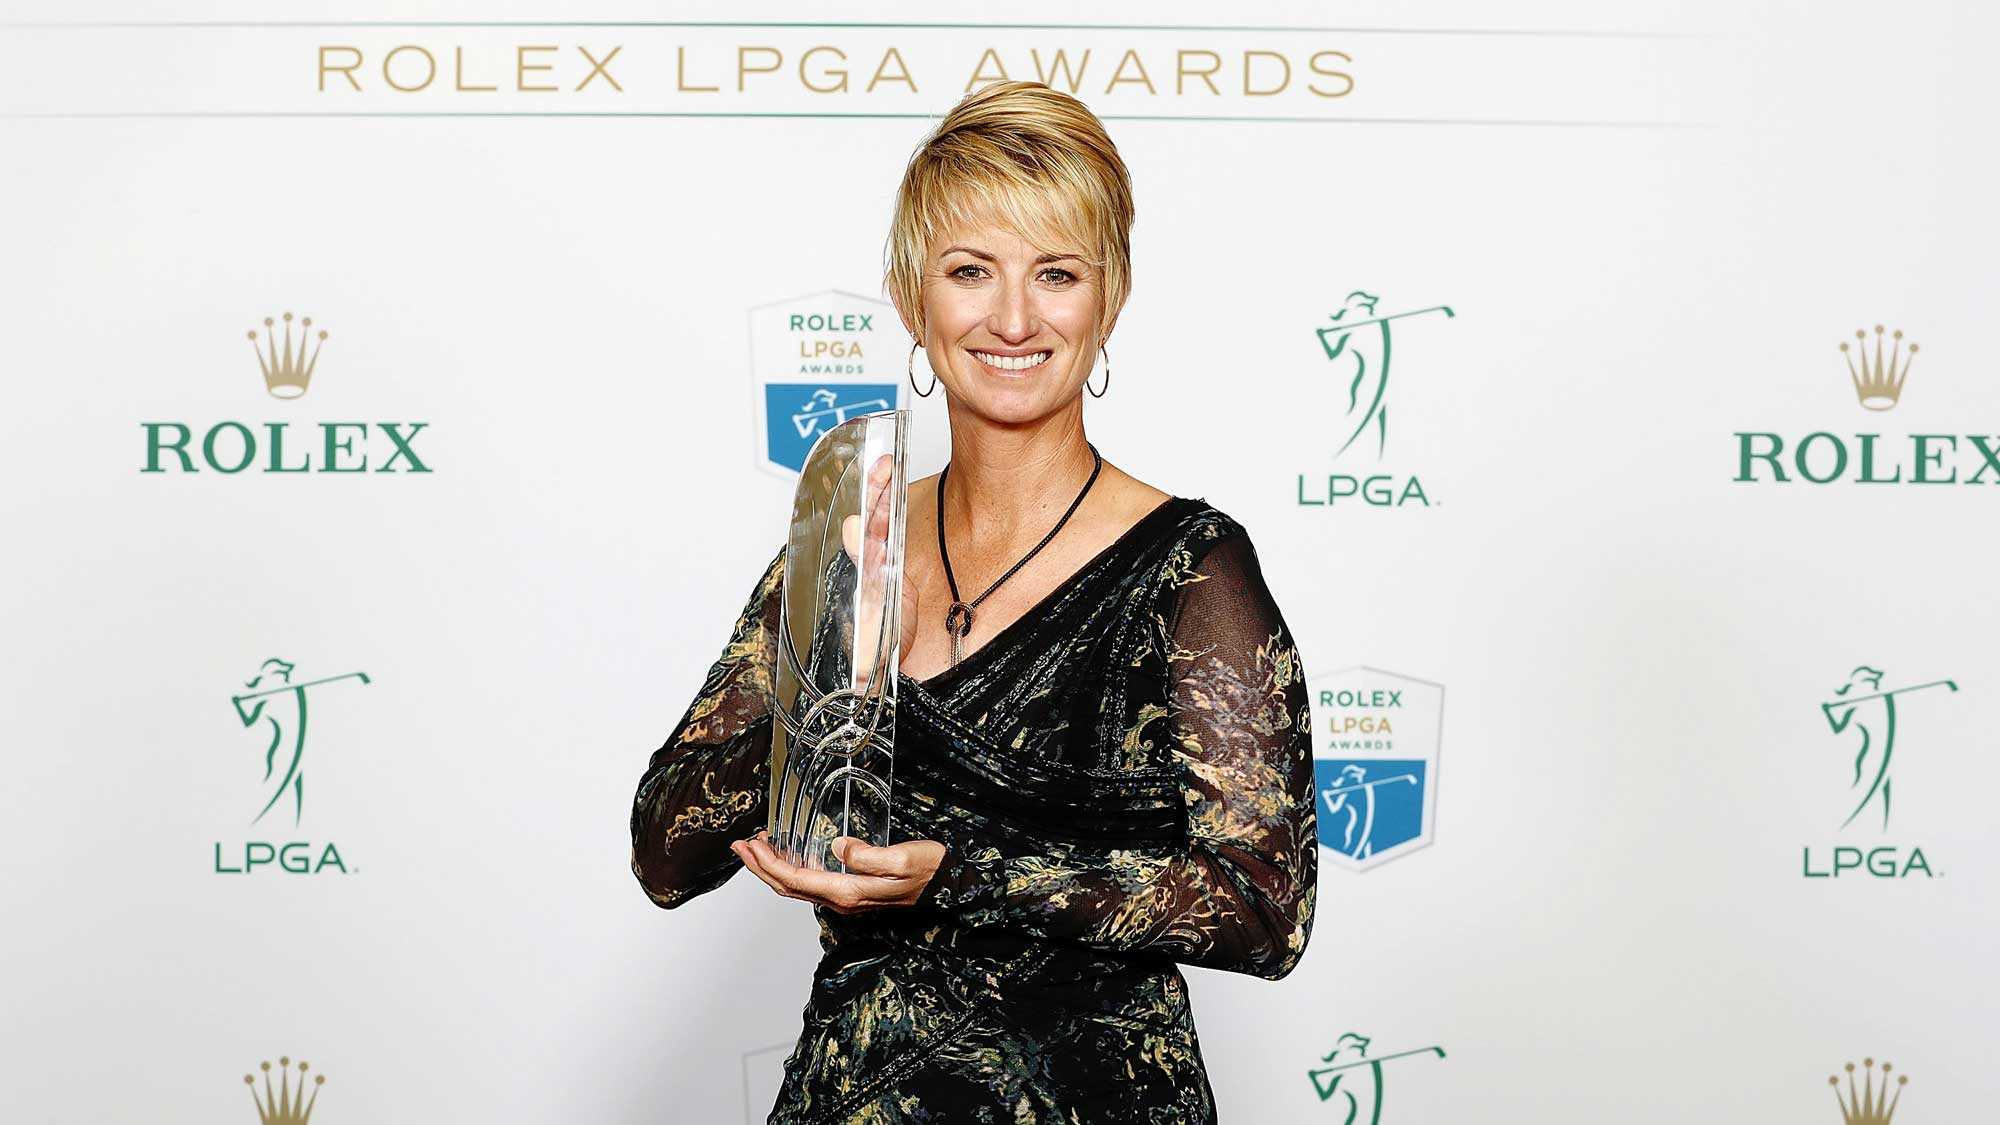 LPGA player Karrie Webb of Australia poses with the William & Mousie Powell Award at the Rolex LPGA Awards